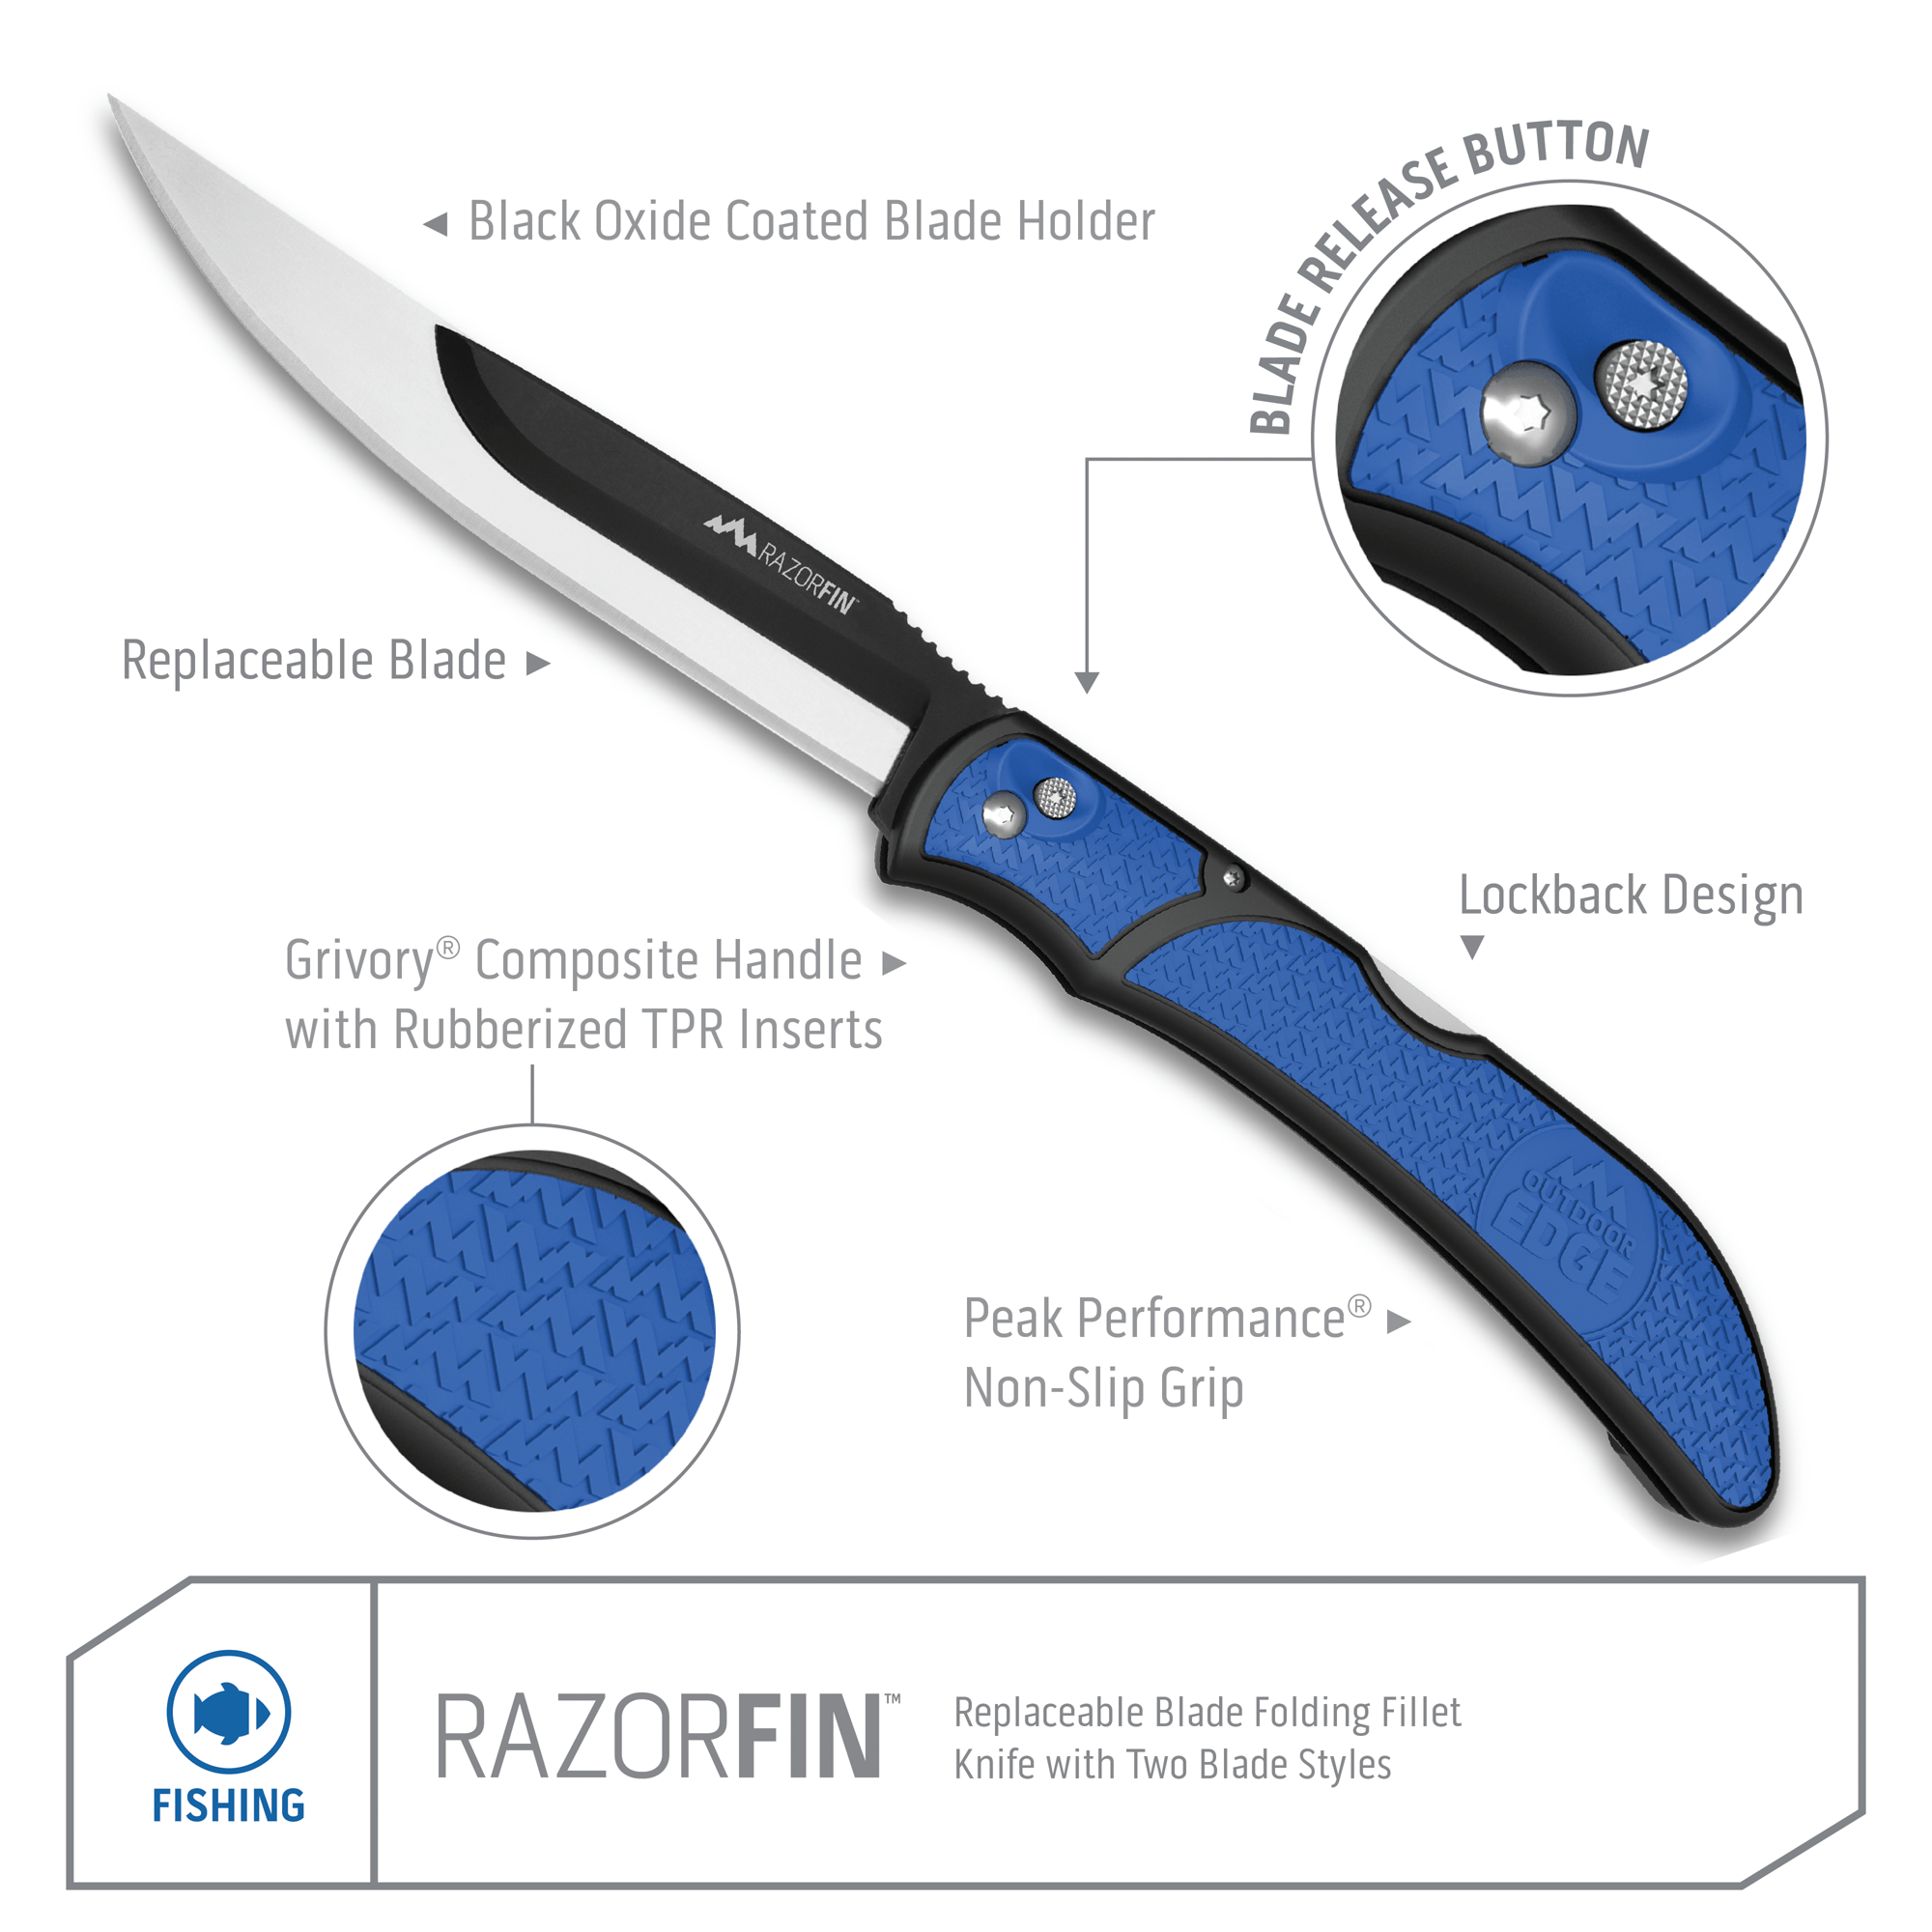 Outdoor Edge RazorFin Fillet Knife Product Photo with callouts